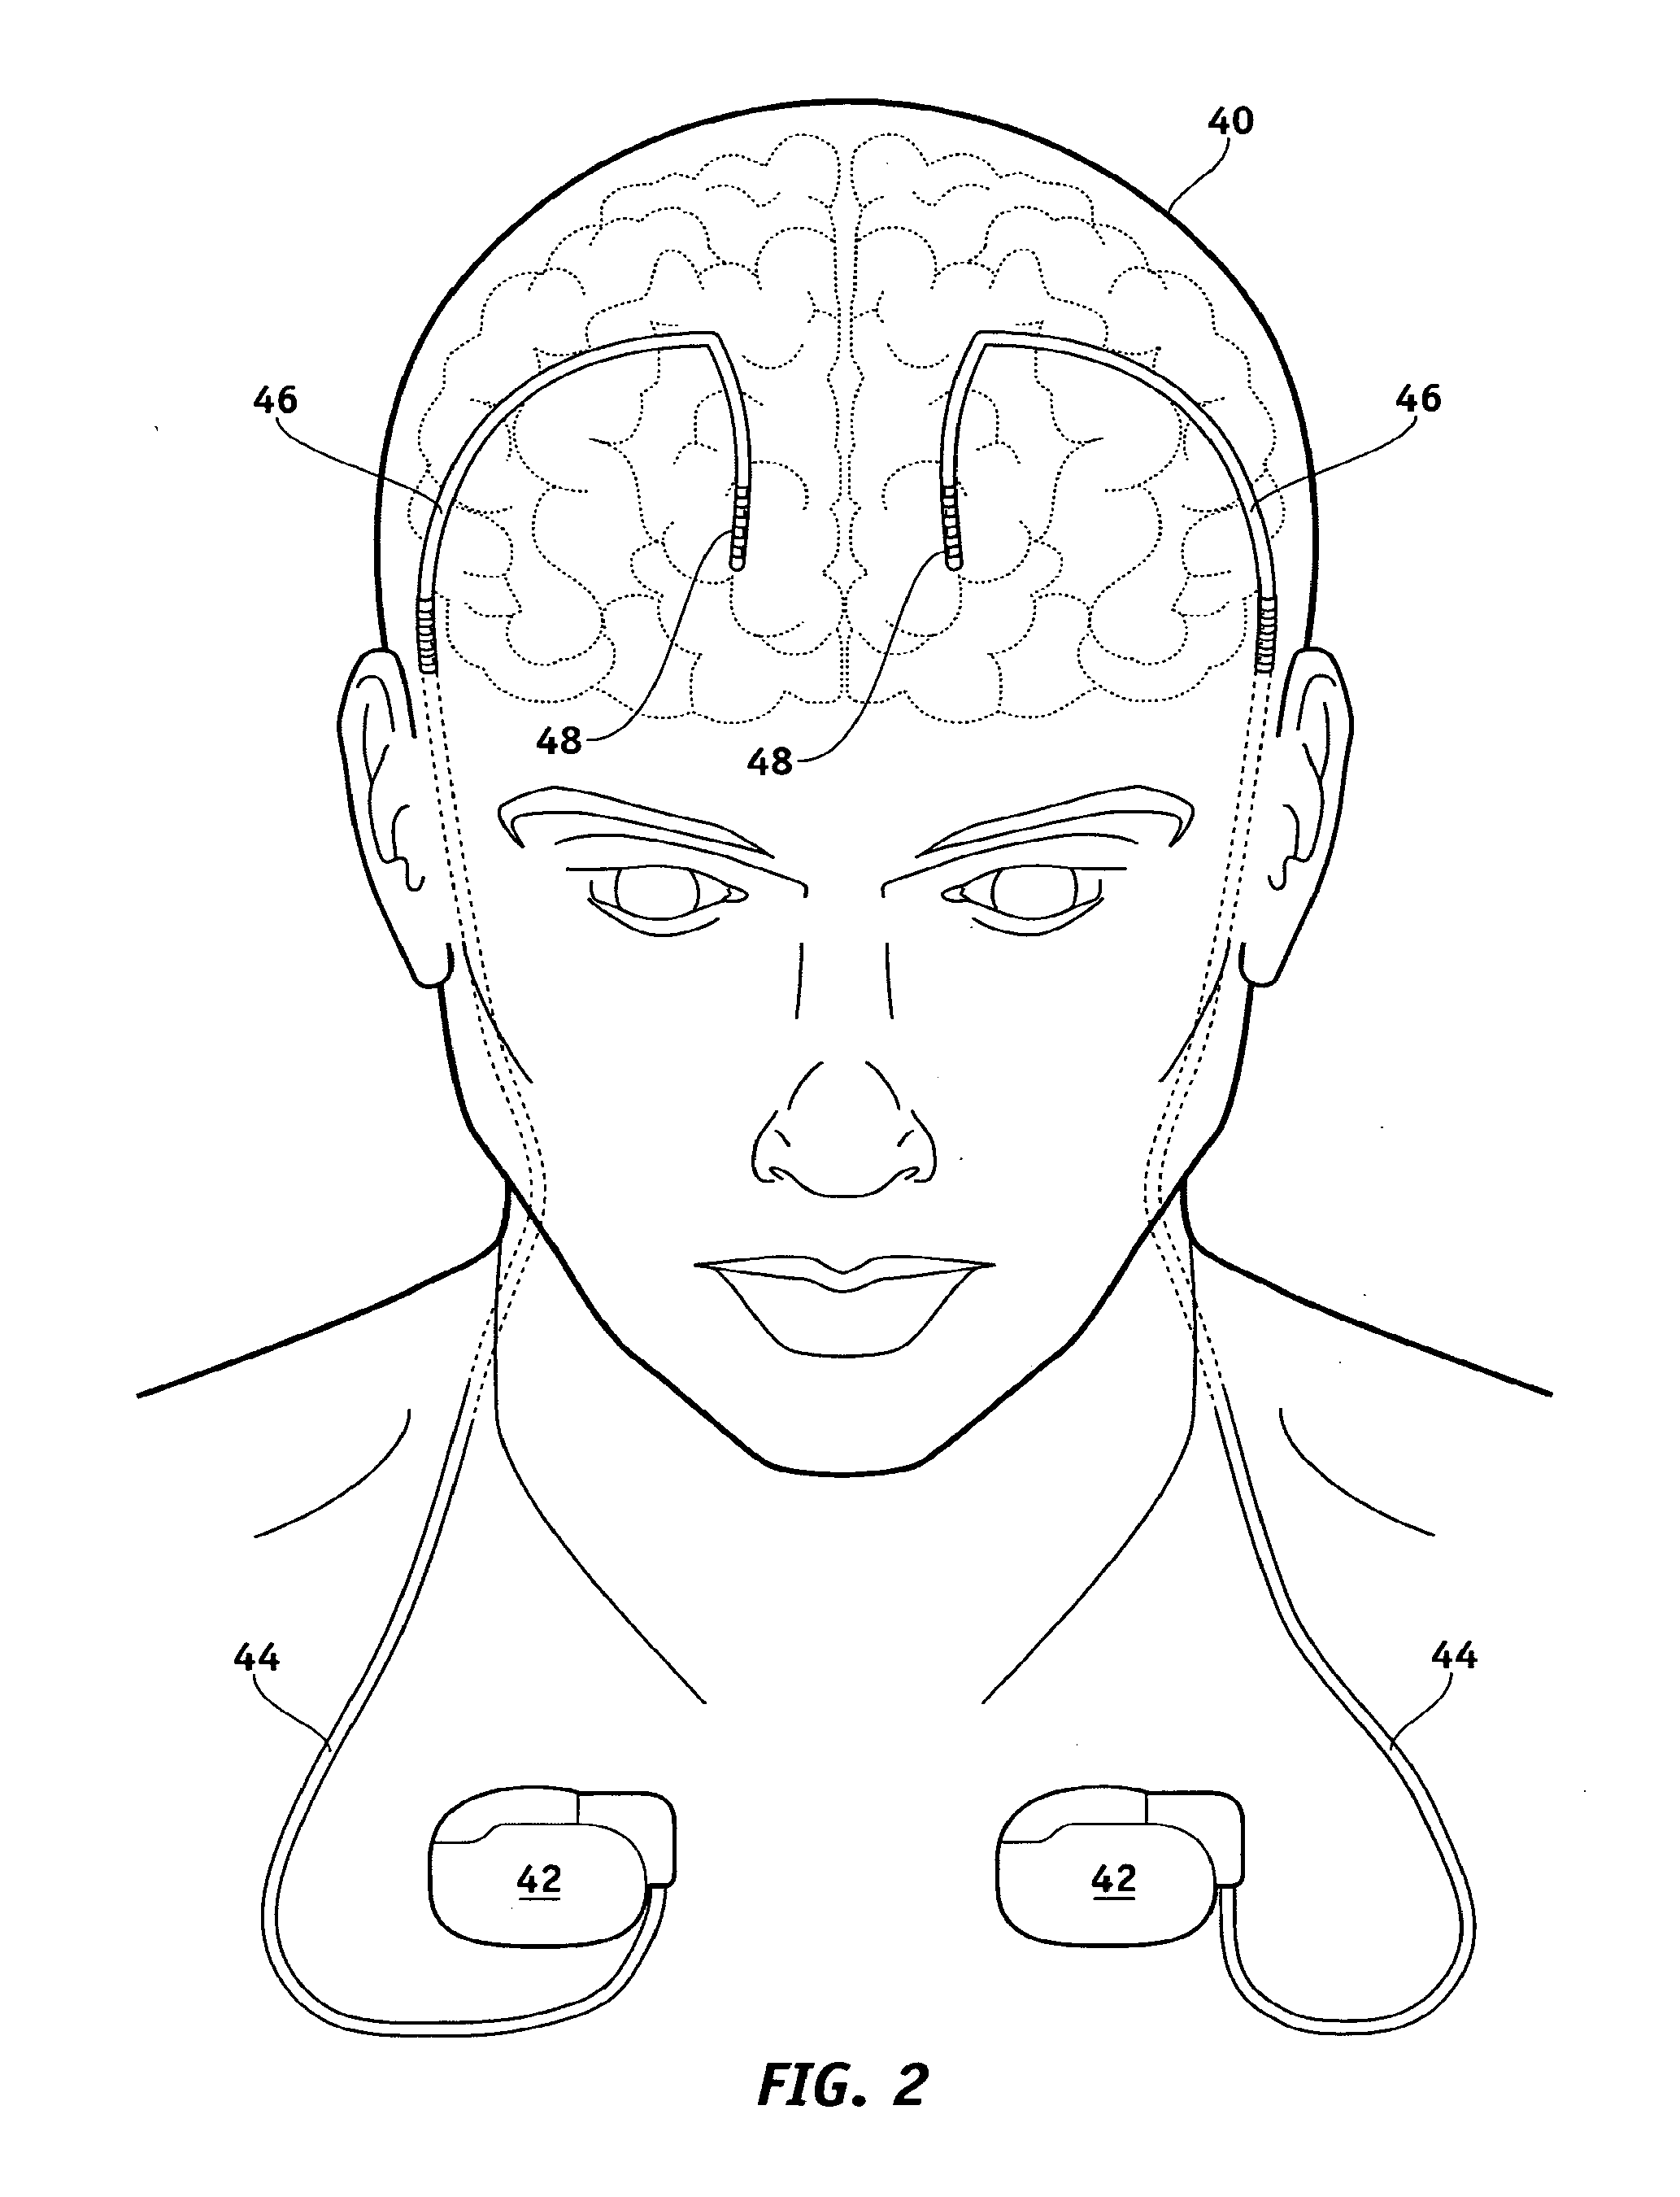 Lead Electrode for Use in an MRI-Safe Implantable Medical Device